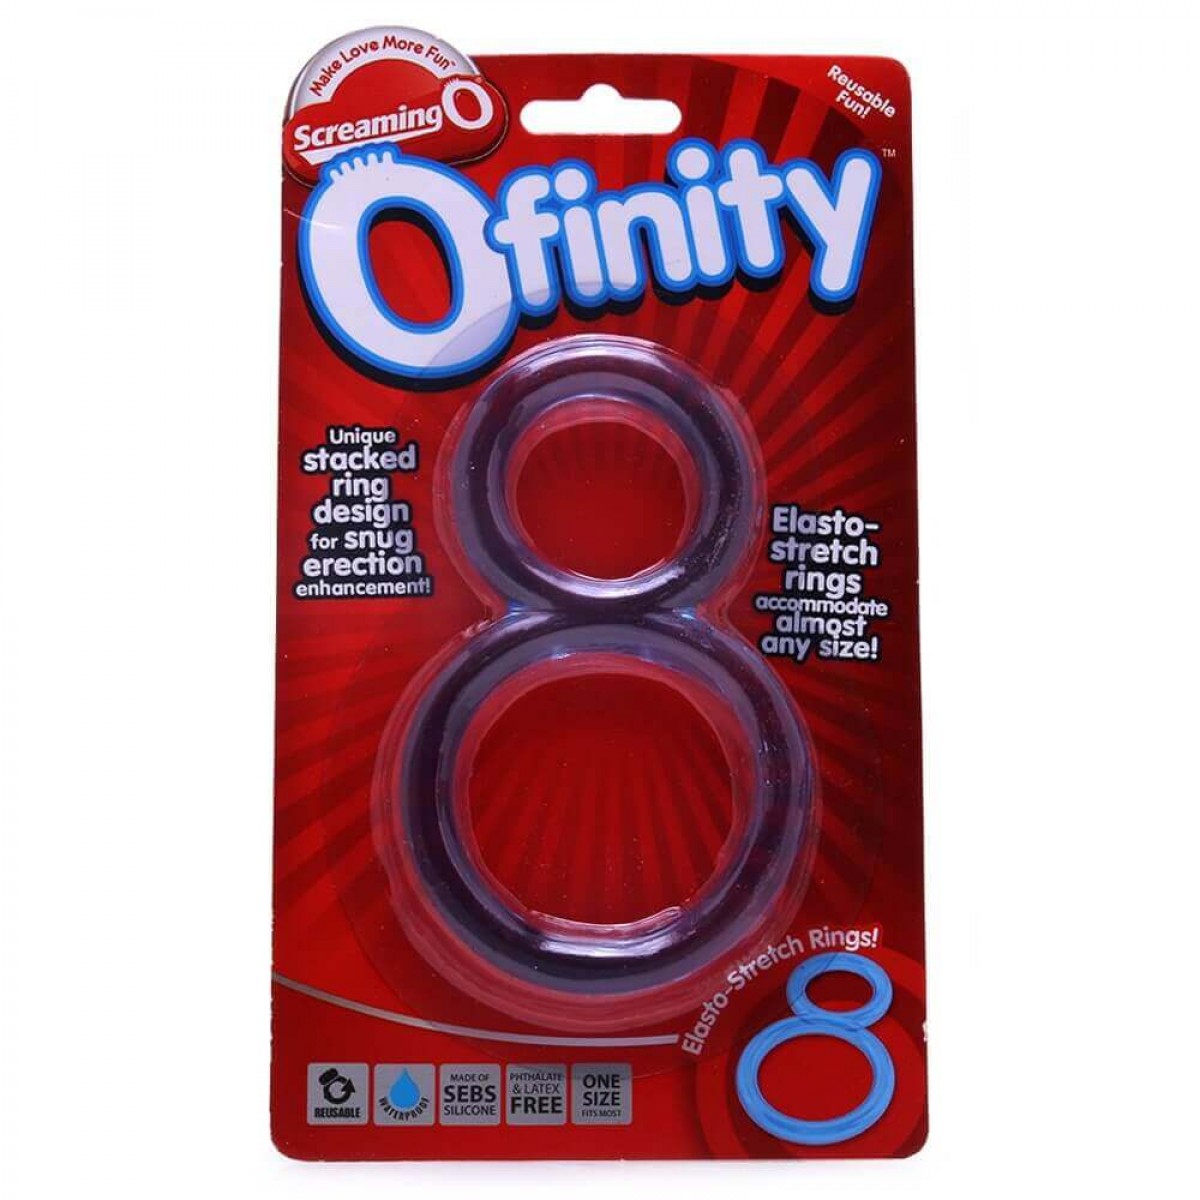 Sex Toys 1hr Delivery Ofinity Elasto Stretch Rings Adult